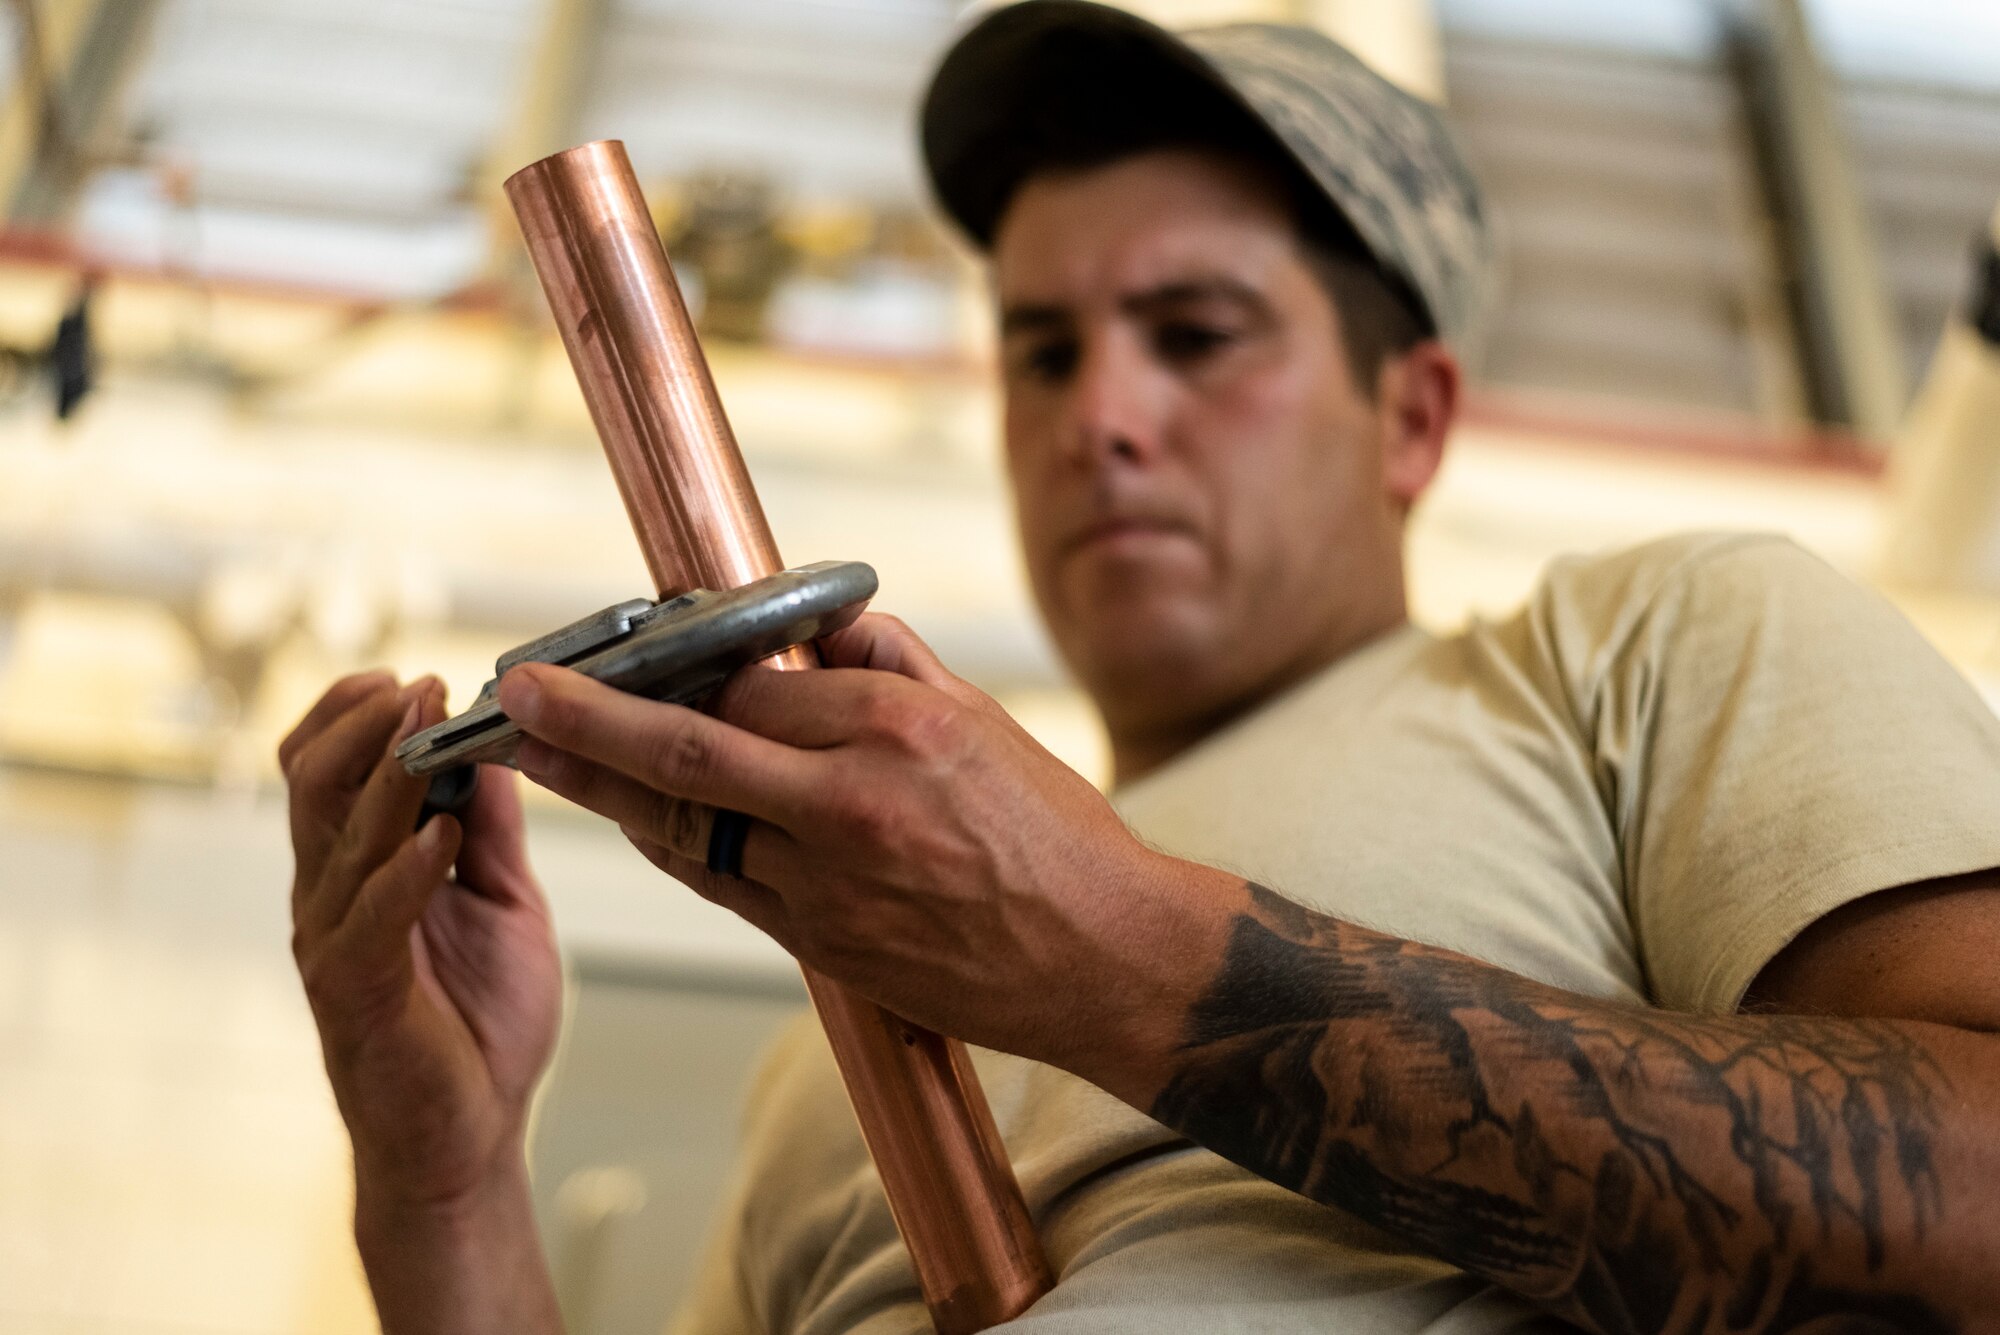 Staff Sgt. Joseph Dickerson, 23d Civil Engineer Squadron (CES) water and fuel systems maintenance craftsman, cuts a copper pipe to a fitting, July 2, 2019, at Moody Air Force Base, Ga. Airmen from the 23d CES Water and Fuels Systems Maintenance are on-call 24/7 to sustain and maintain the base, water, sewer and gas lines and upkeep of the 696 facilities with water and fuel infrastructure. (U.S. Air Force photo by Airman 1st Class Taryn Butler)